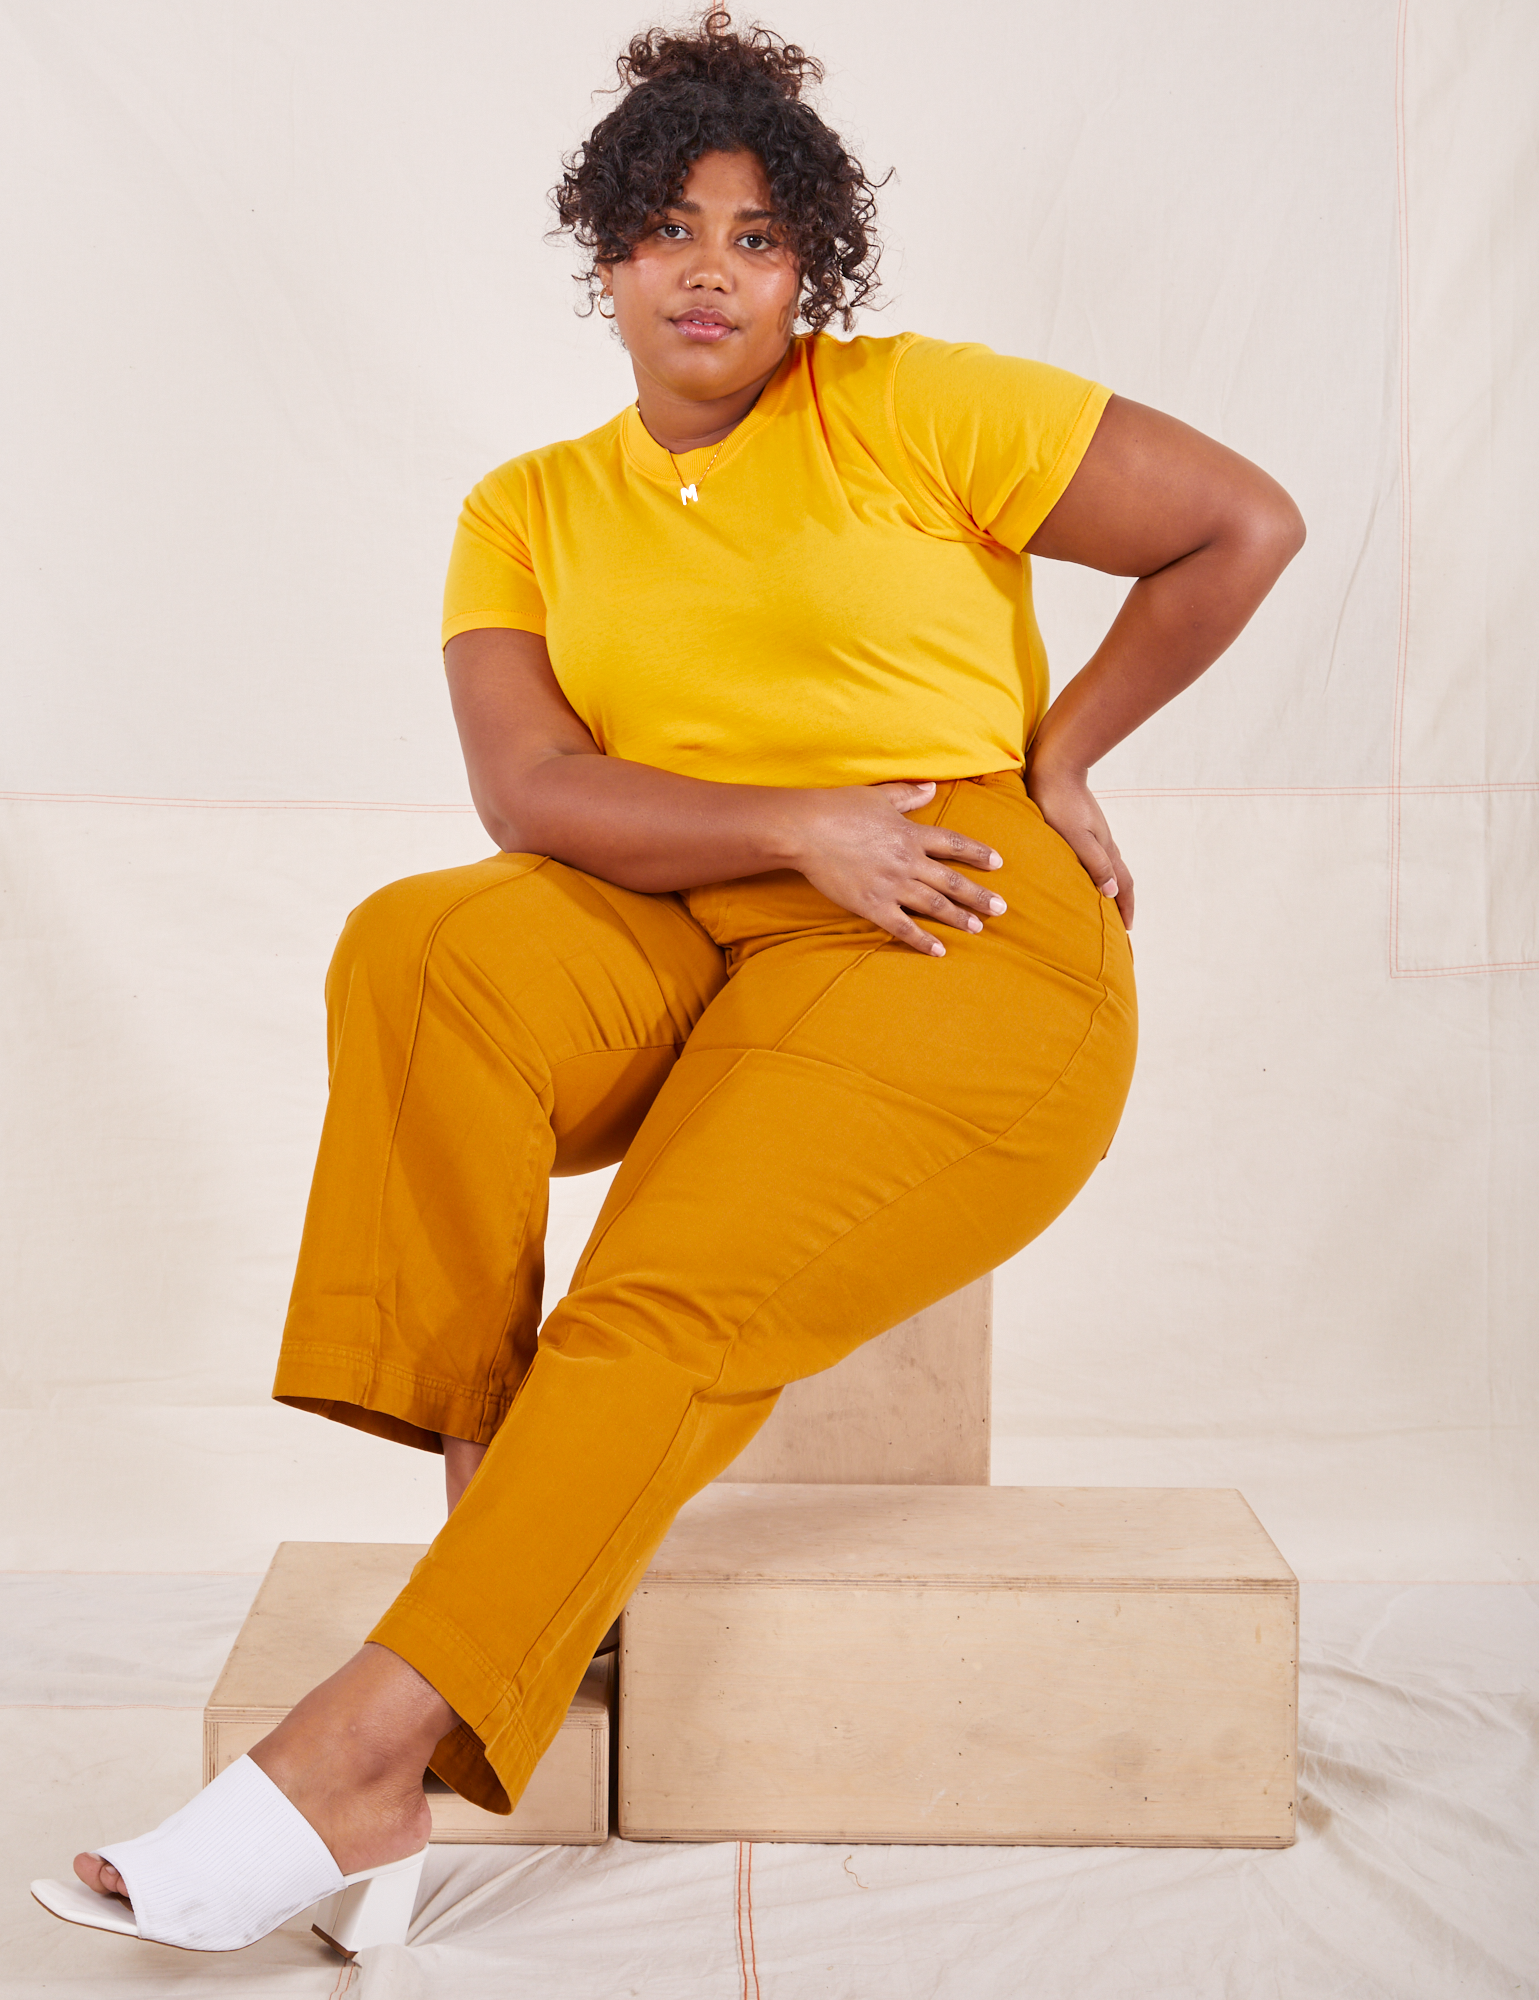 Morgan is wearing L Organic Vintage Tee in Sunshine Yellow paired with spicy mustard Western Pants